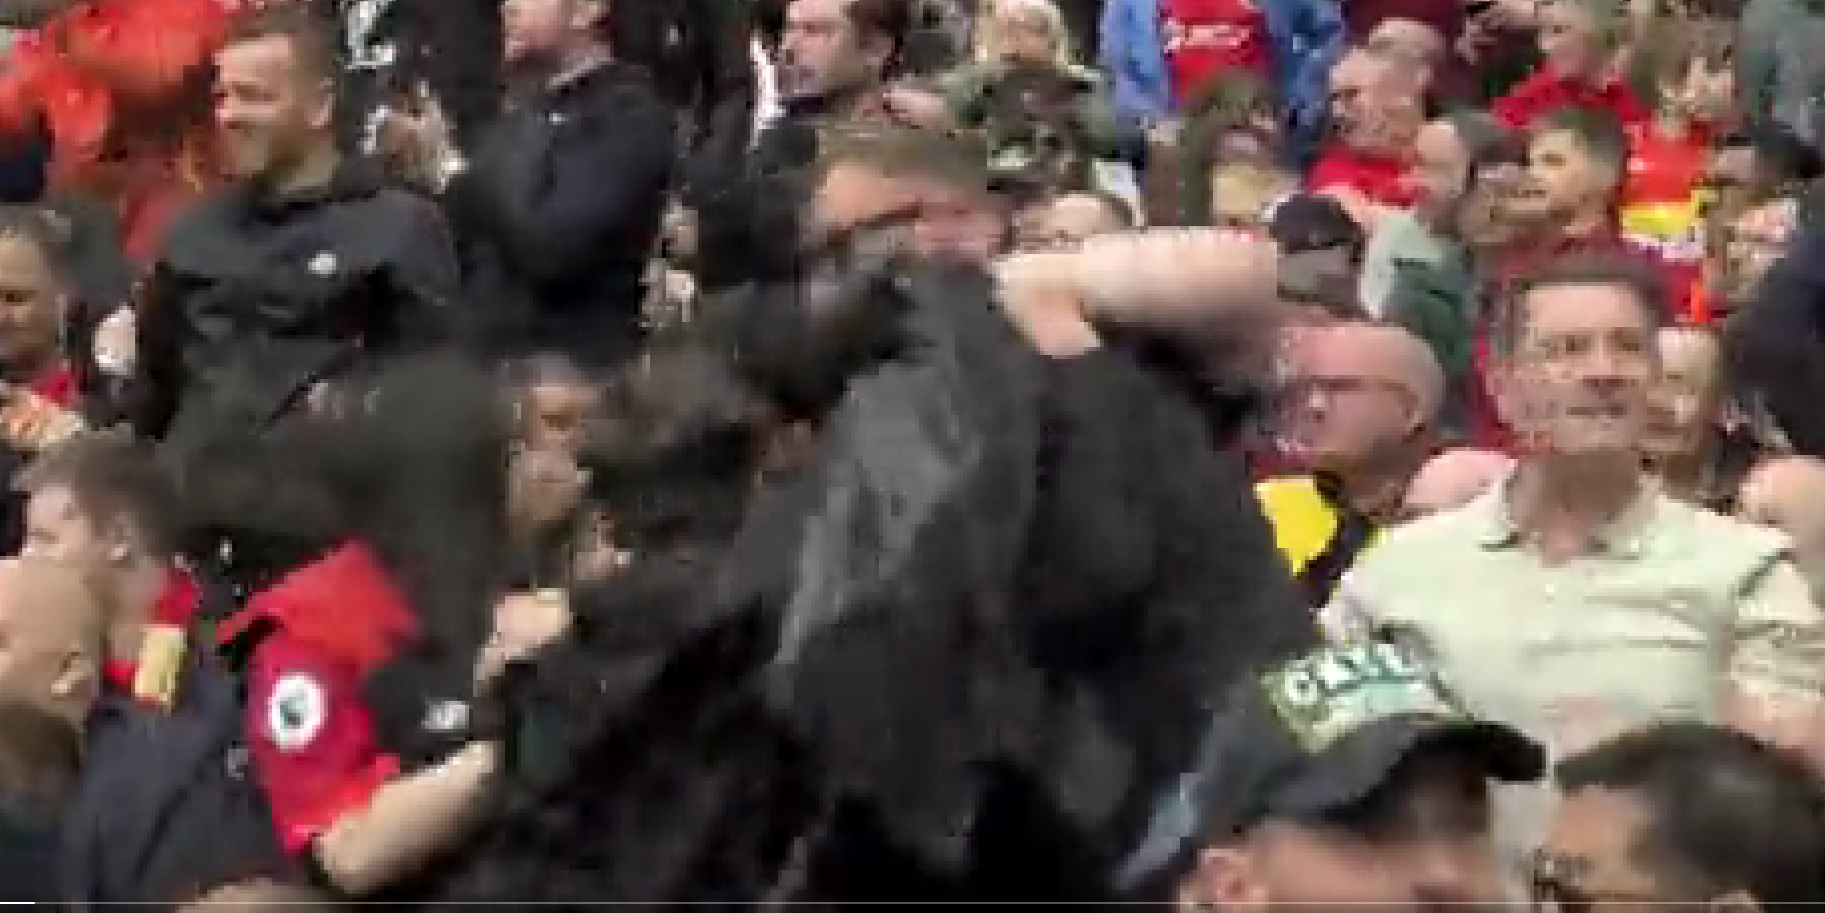 (Video) Watch how Liverpool fans reacted at Anfield to Aston Villa scoring against Manchester City